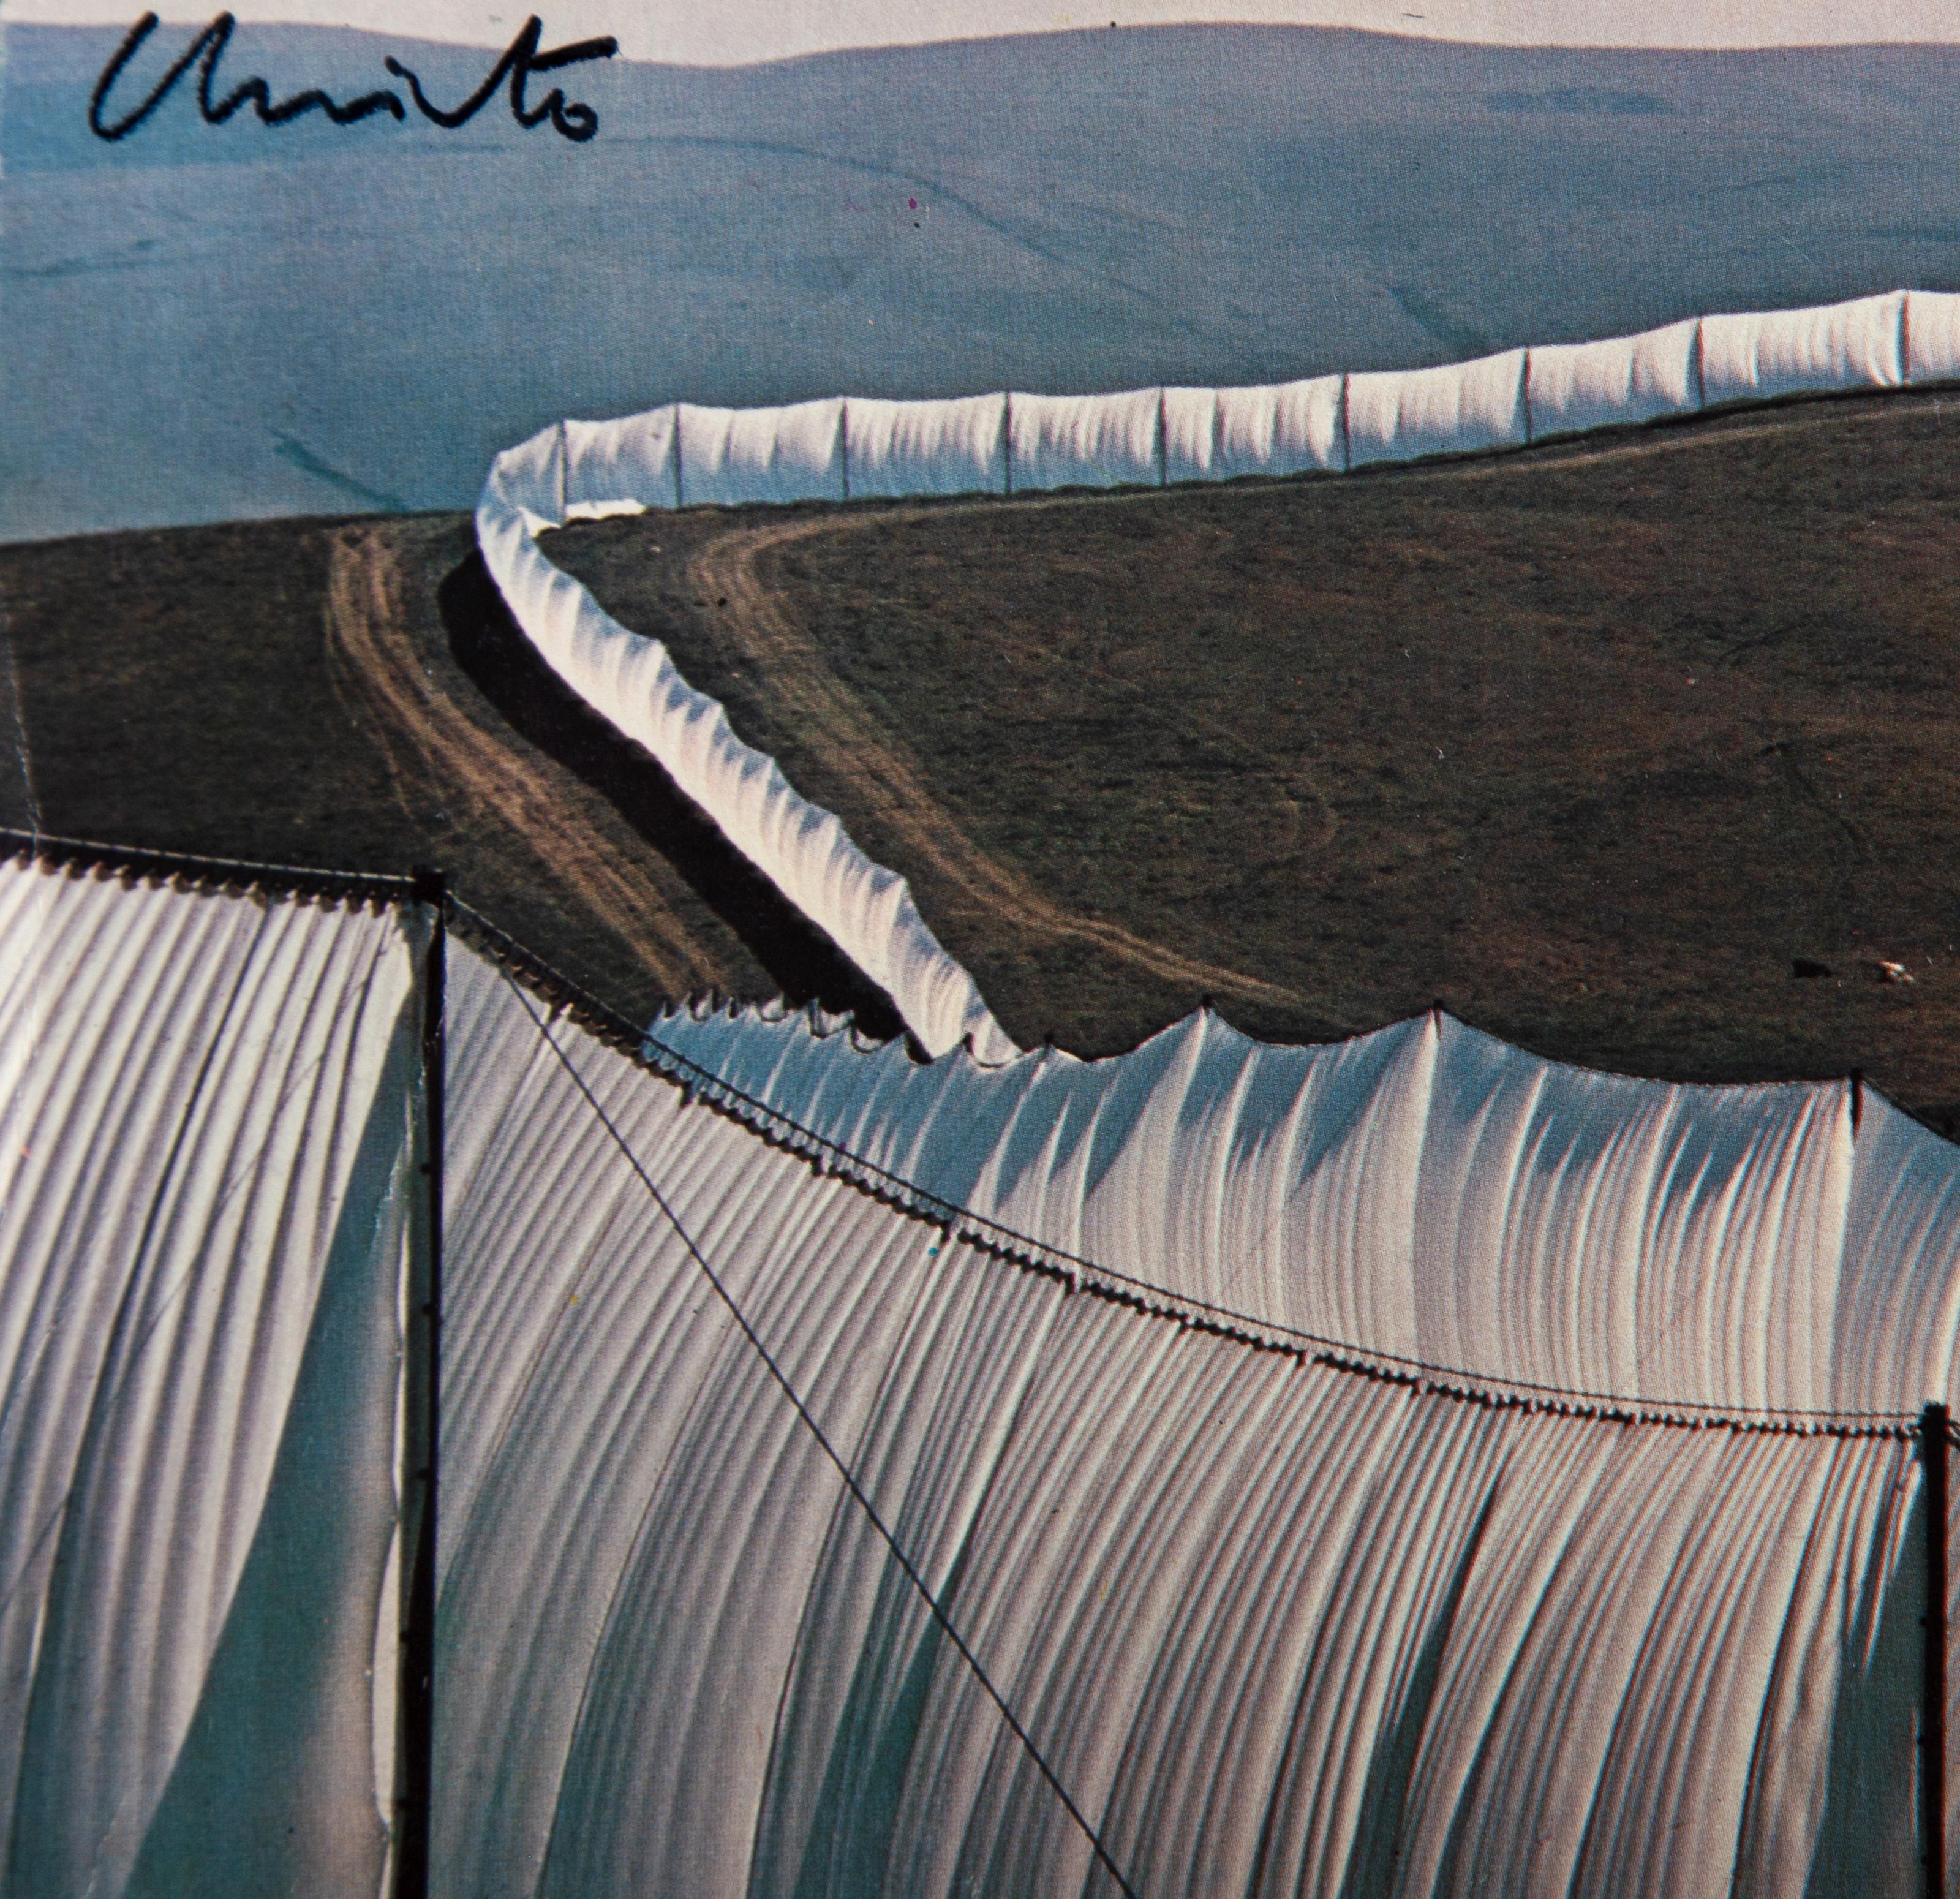 Running Fence Postcard, Postcard, signed in marker by Christo and Jeanne-Claude For Sale 2